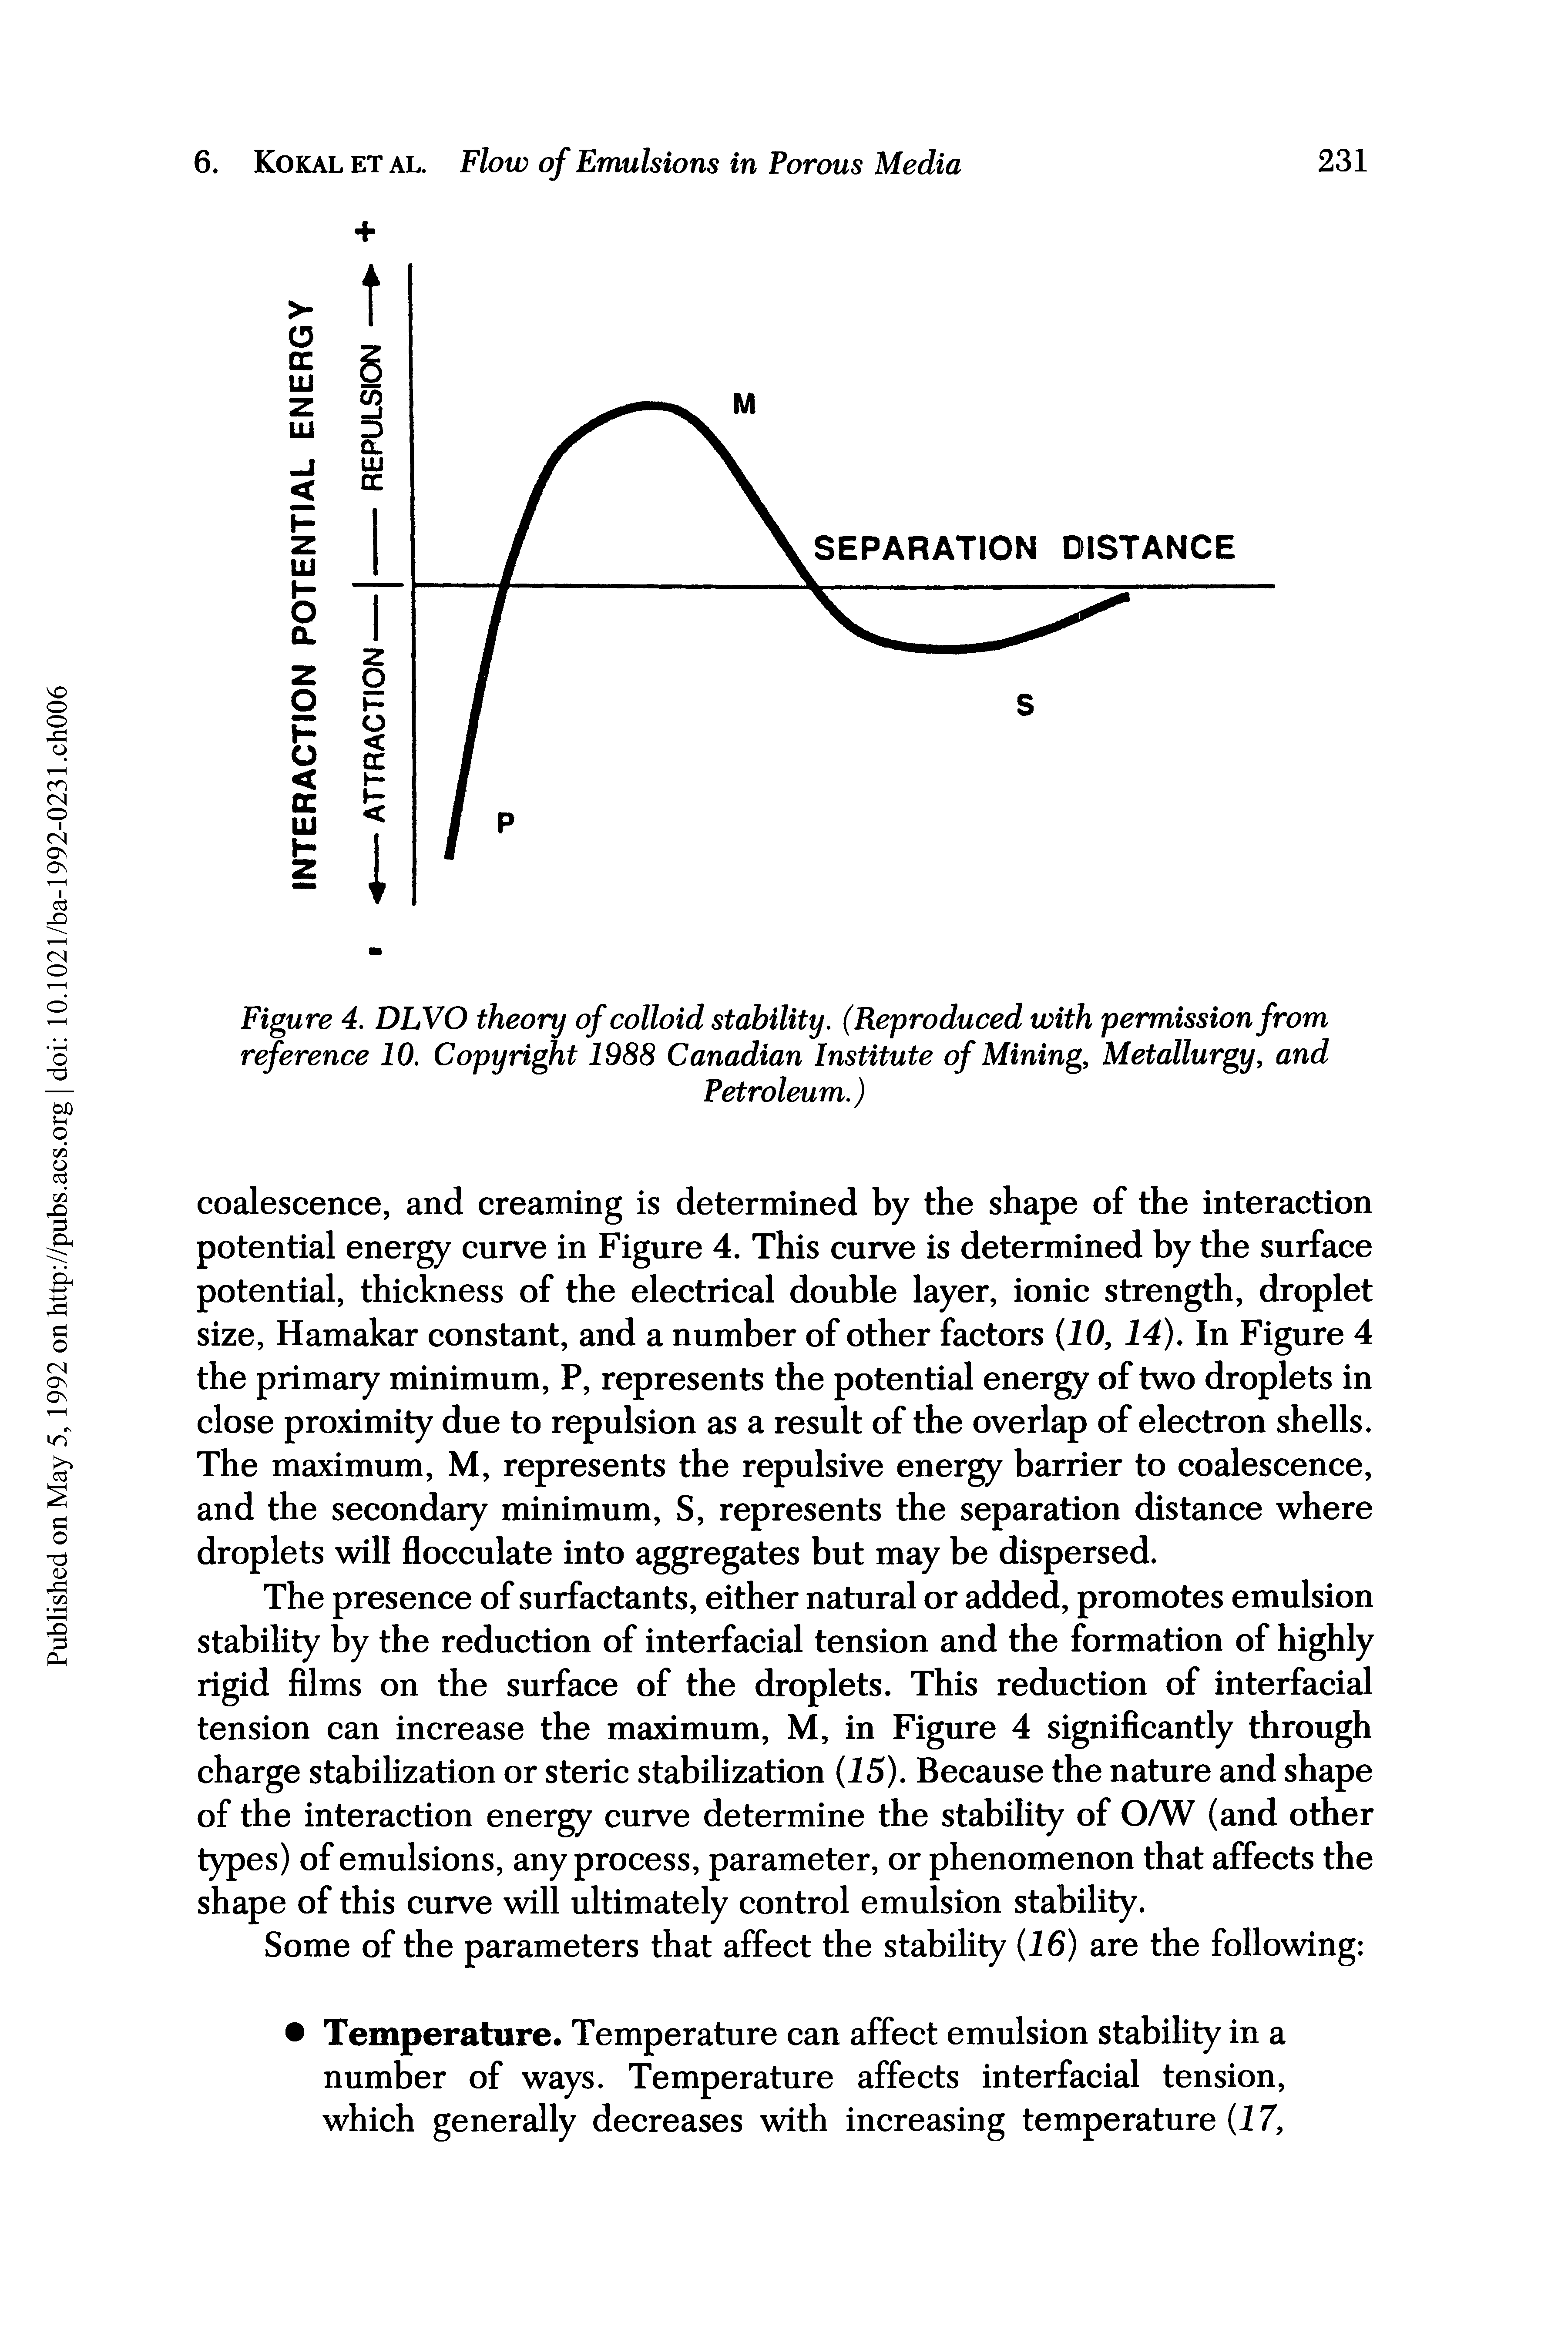 Figure 4. DLVO theory of colloid stability. (Reproduced with permission from reference 10. Copyright 1988 Canadian Institute of Mining, Metallurgy, and...